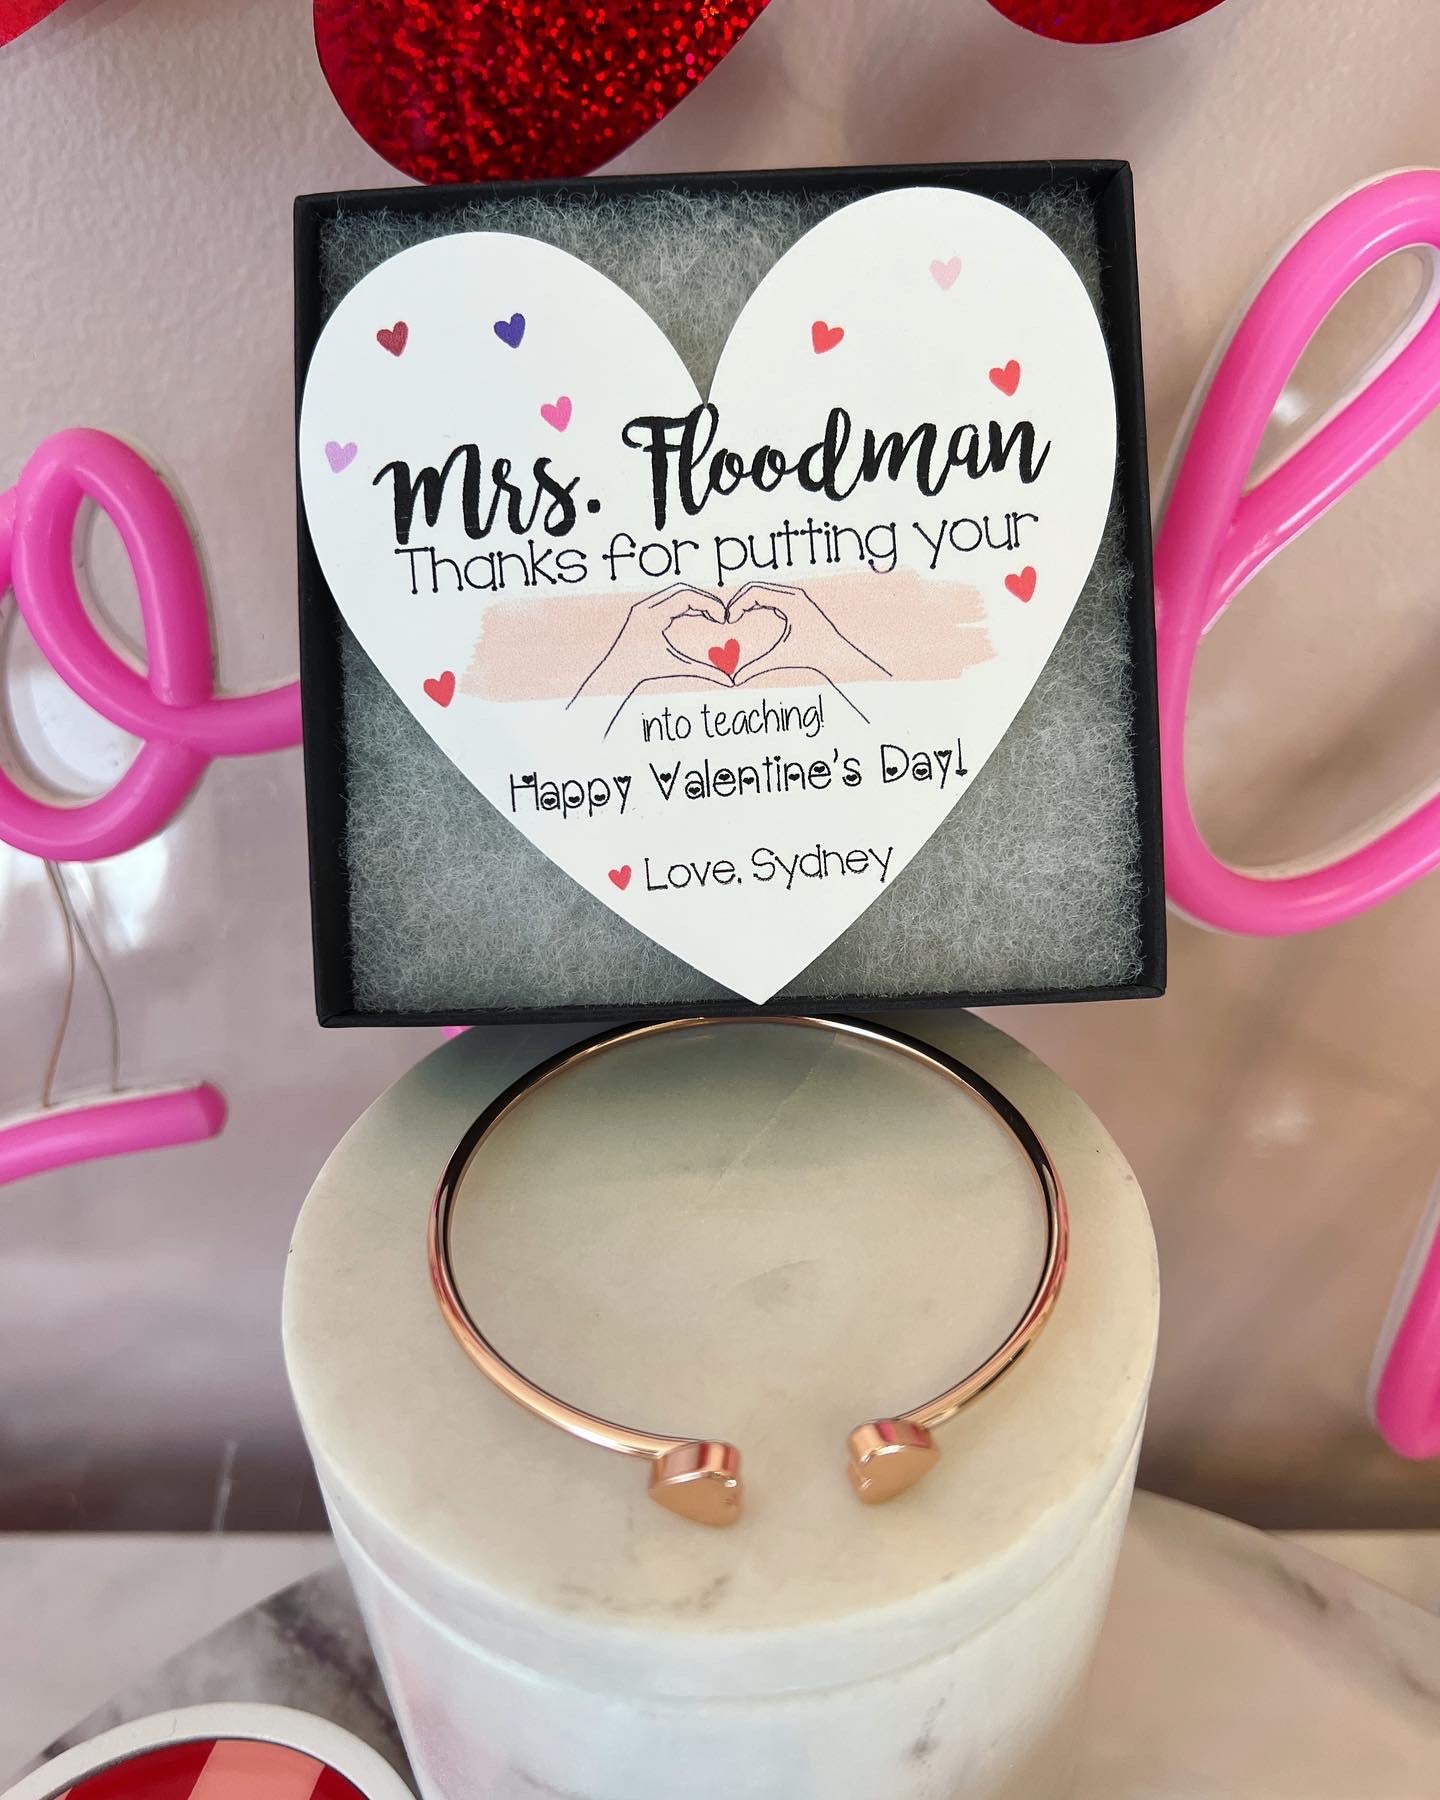 Thanks for putting your heart into teaching, heart cuff bangle, card, box & ribbon included!